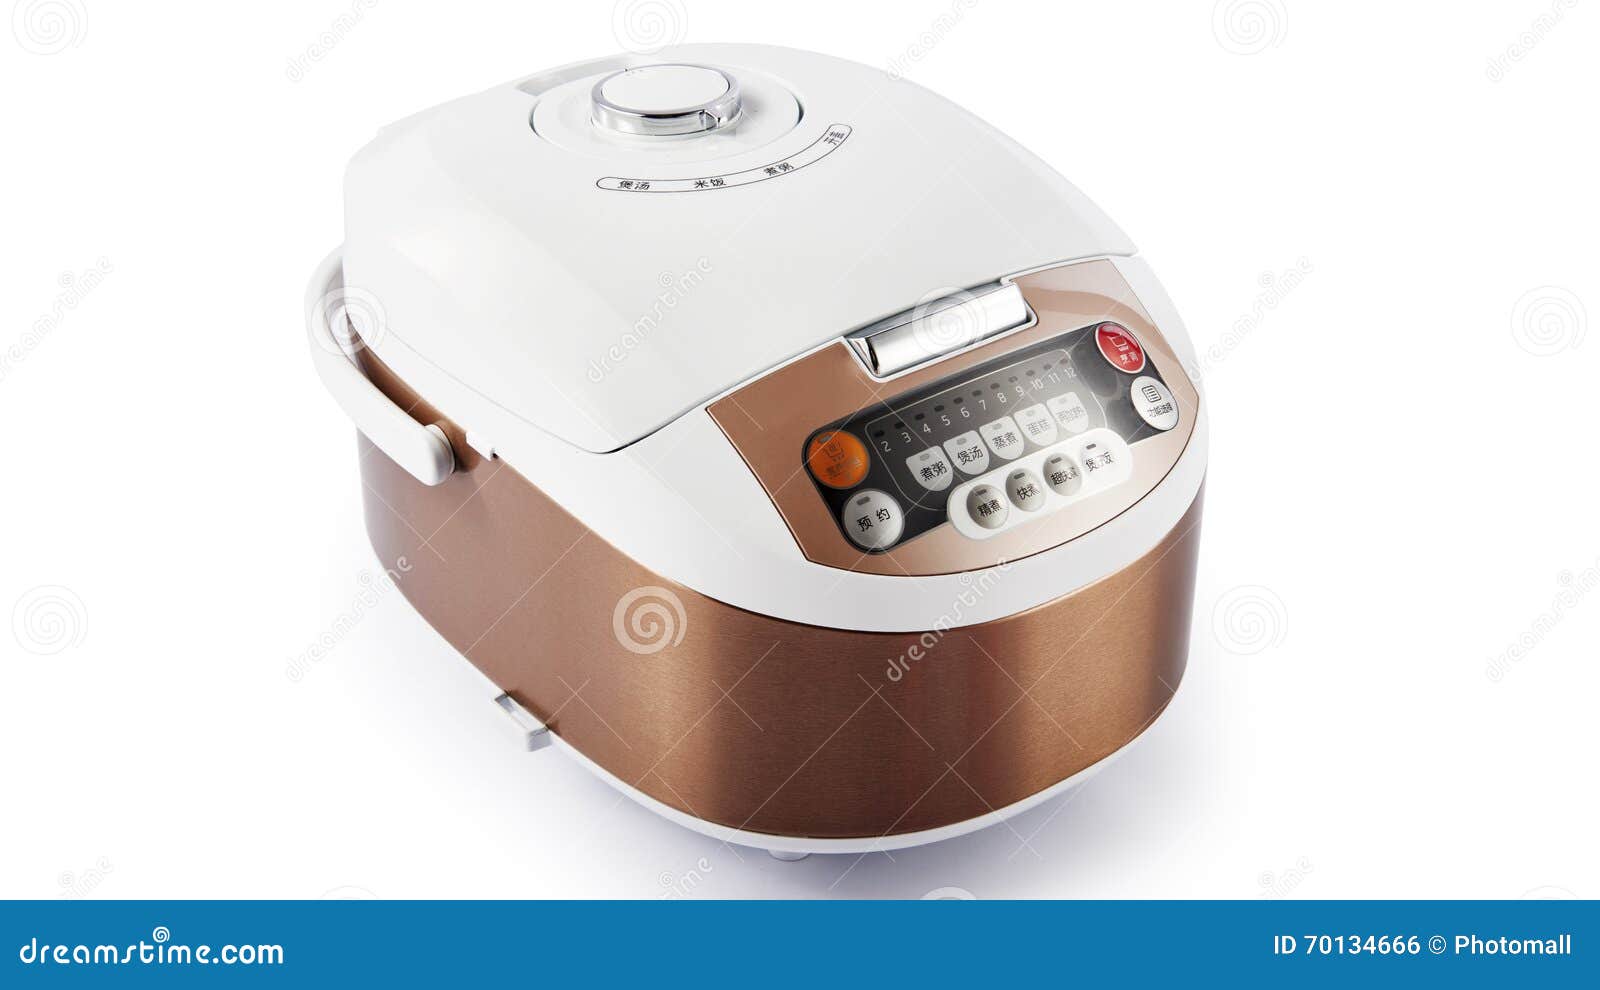 electronic digital rice cooker